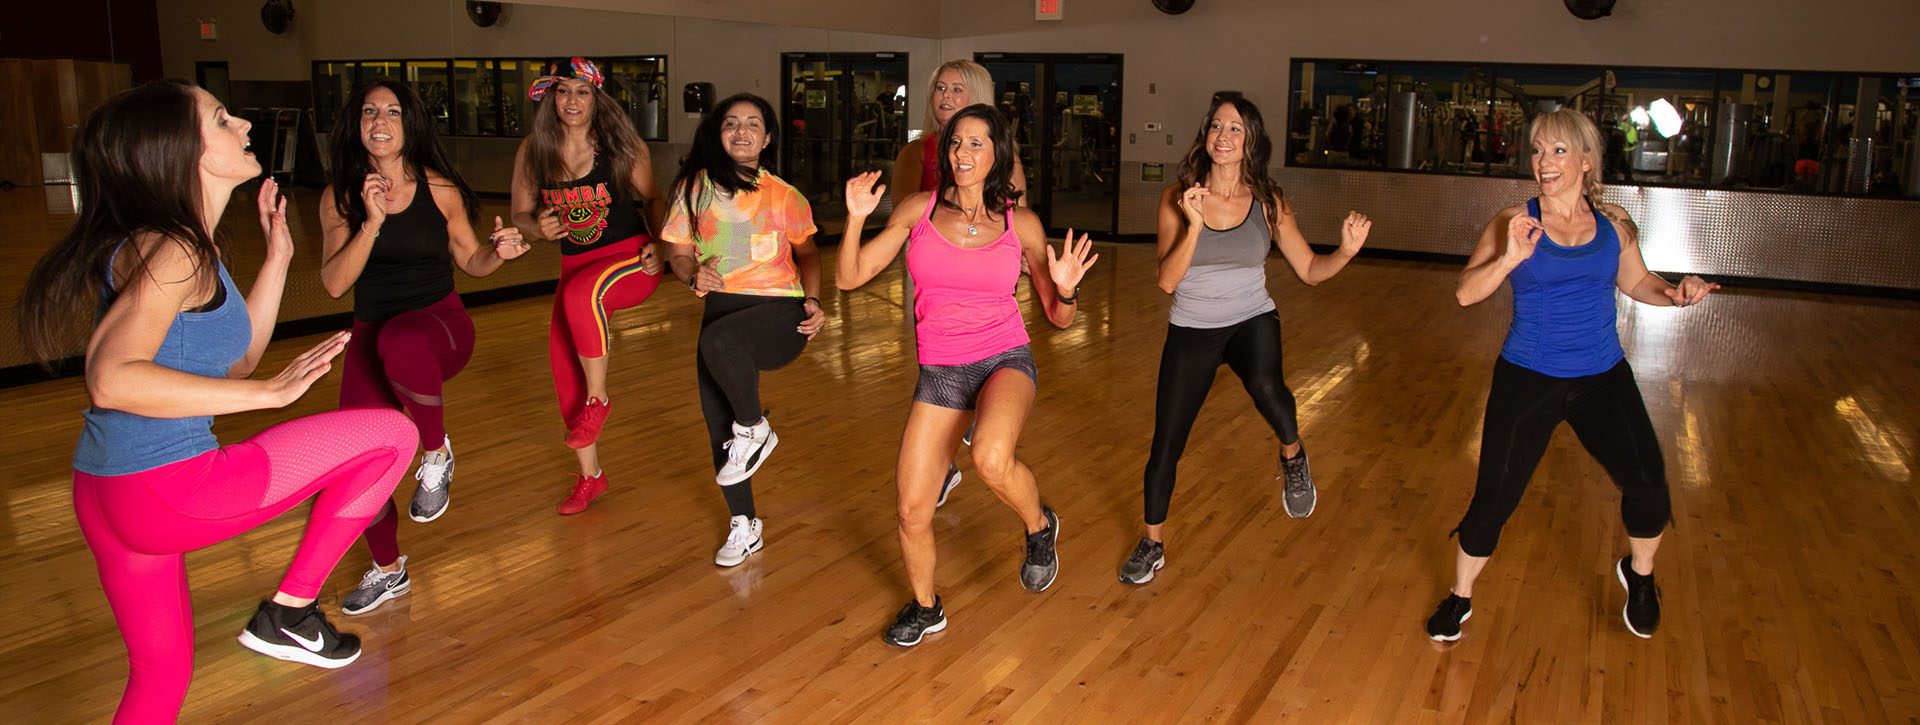 exciting fun zumba class at gym